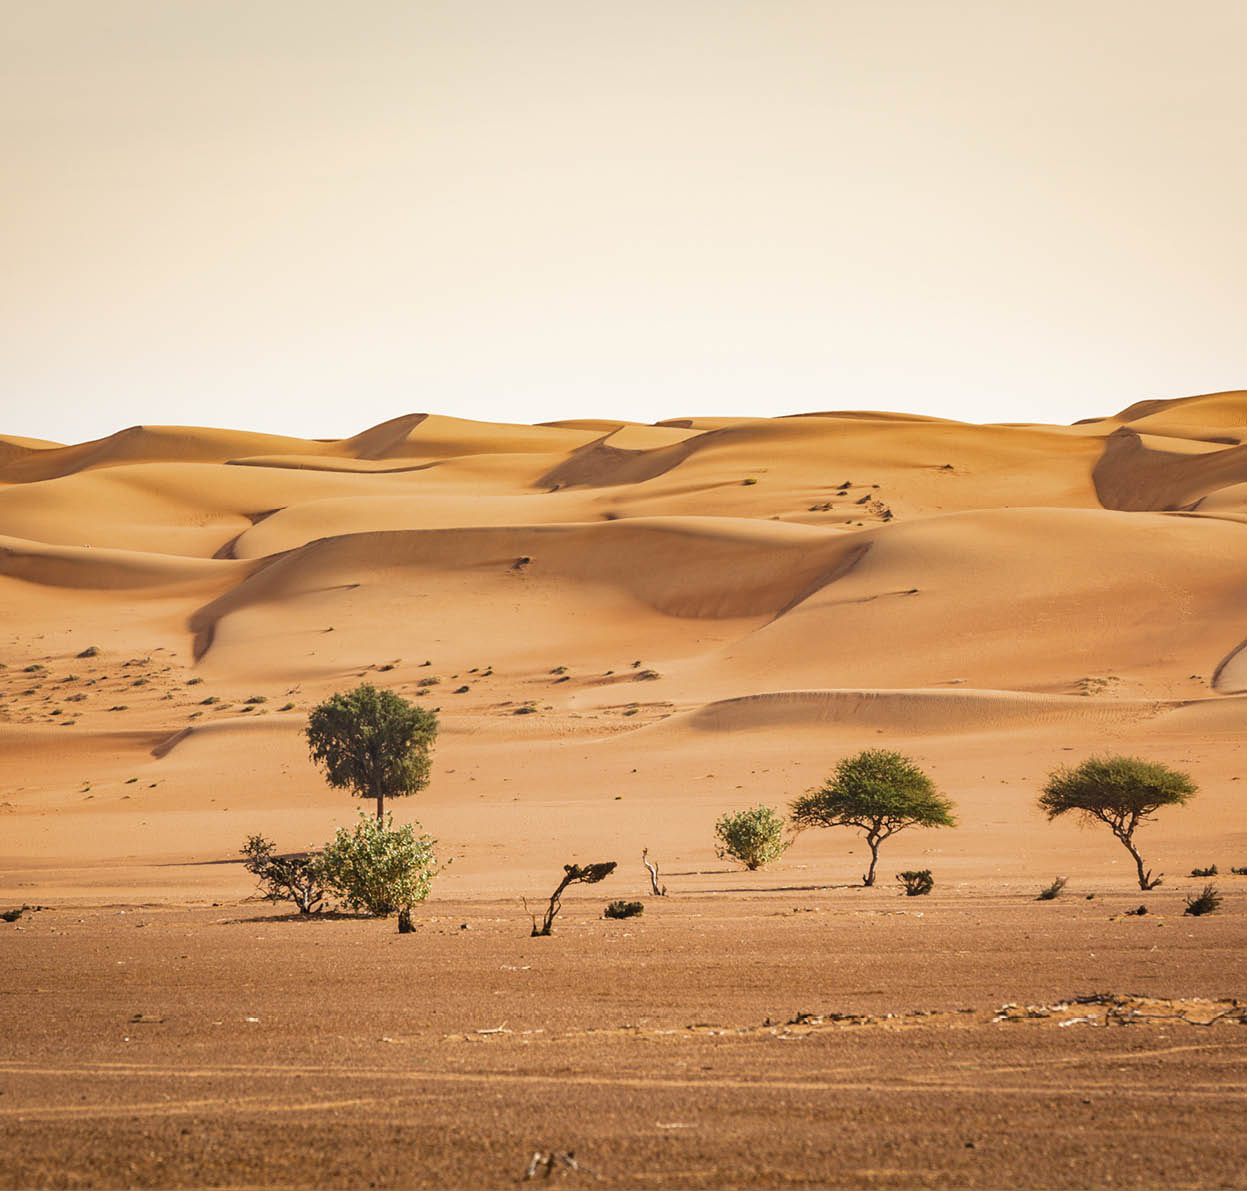 view trees growing at the beginning of the wahiba sand desert in the sultanate of oman.